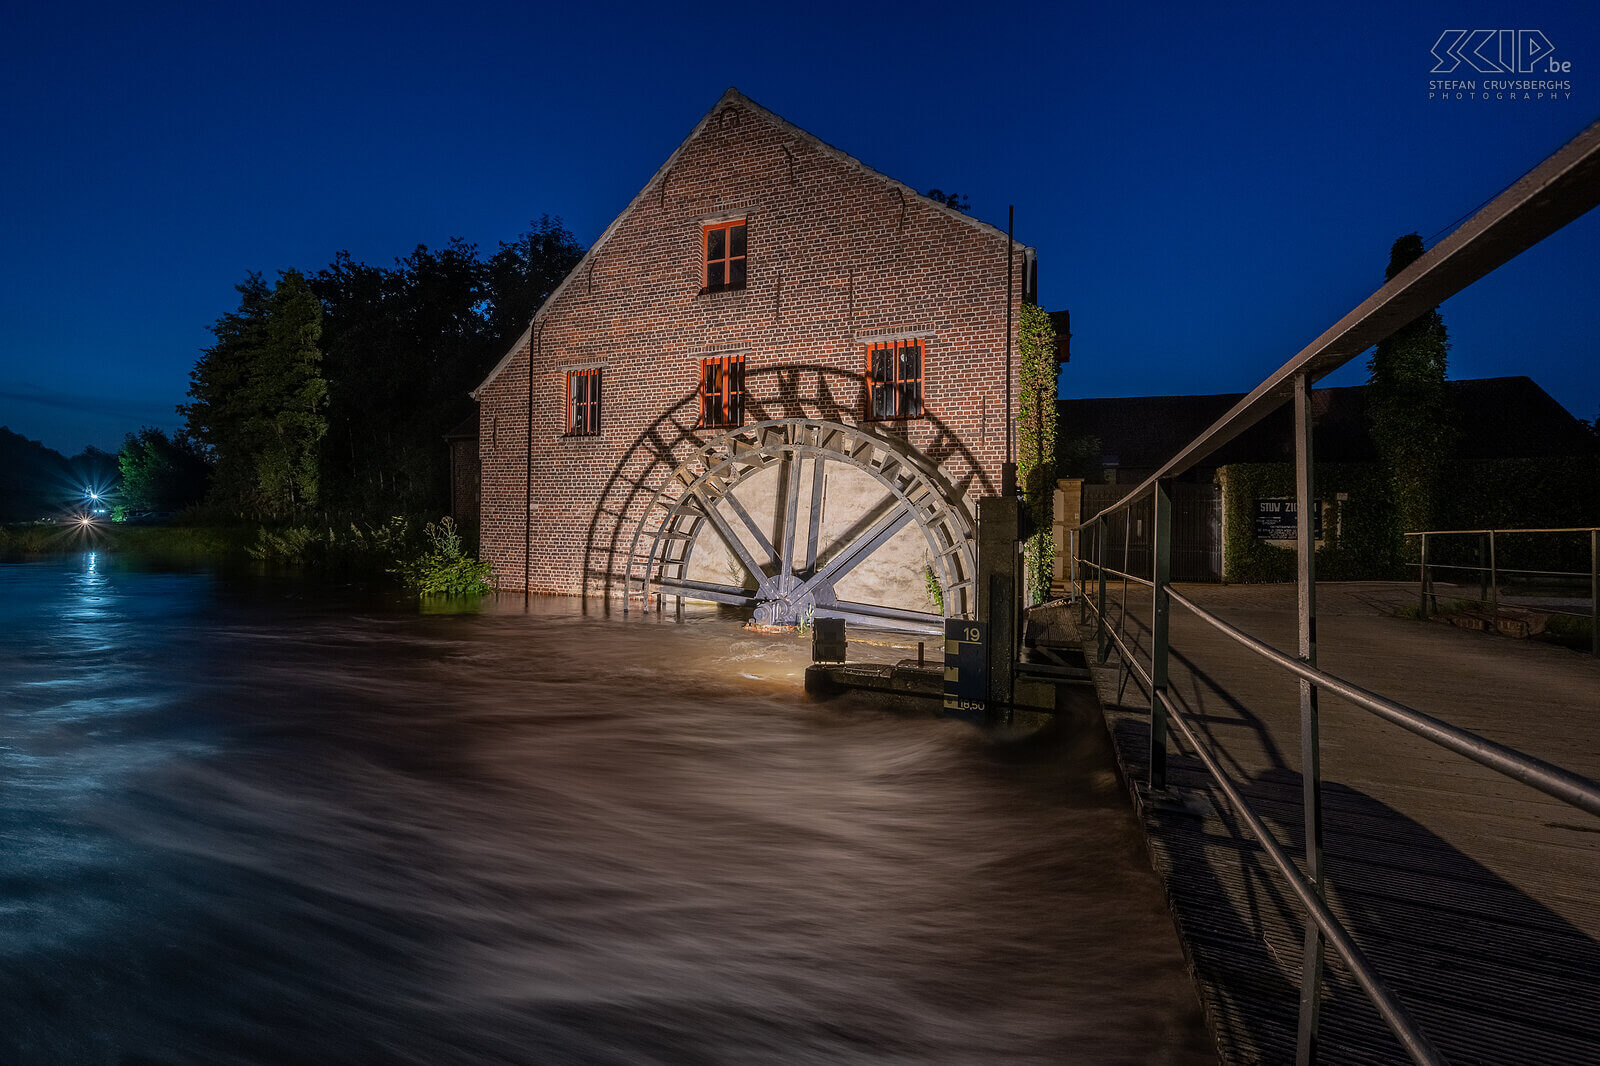 Hageland by night - Water mill in Zichem In the summer of 2021, the Demer overflowed its banks in a number of places and the water was extremely high at the water mill of Zichem. Stefan Cruysberghs